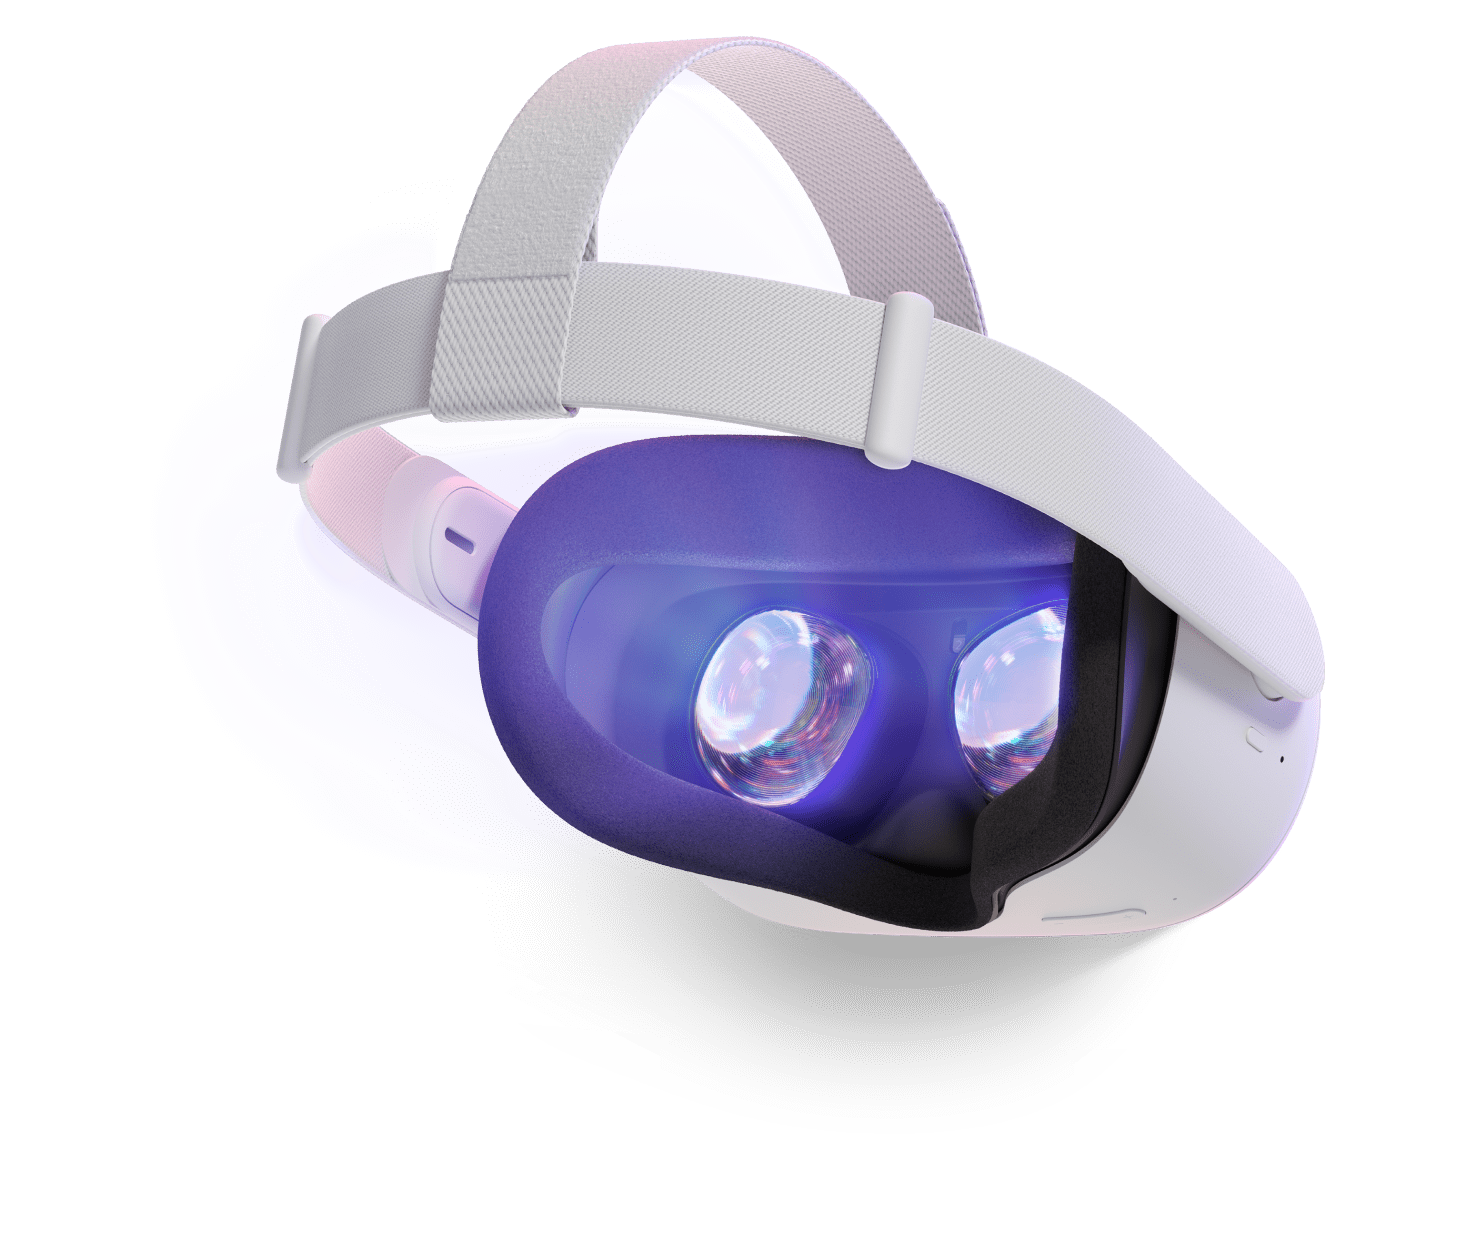 Meta Quest VR headset, from the back